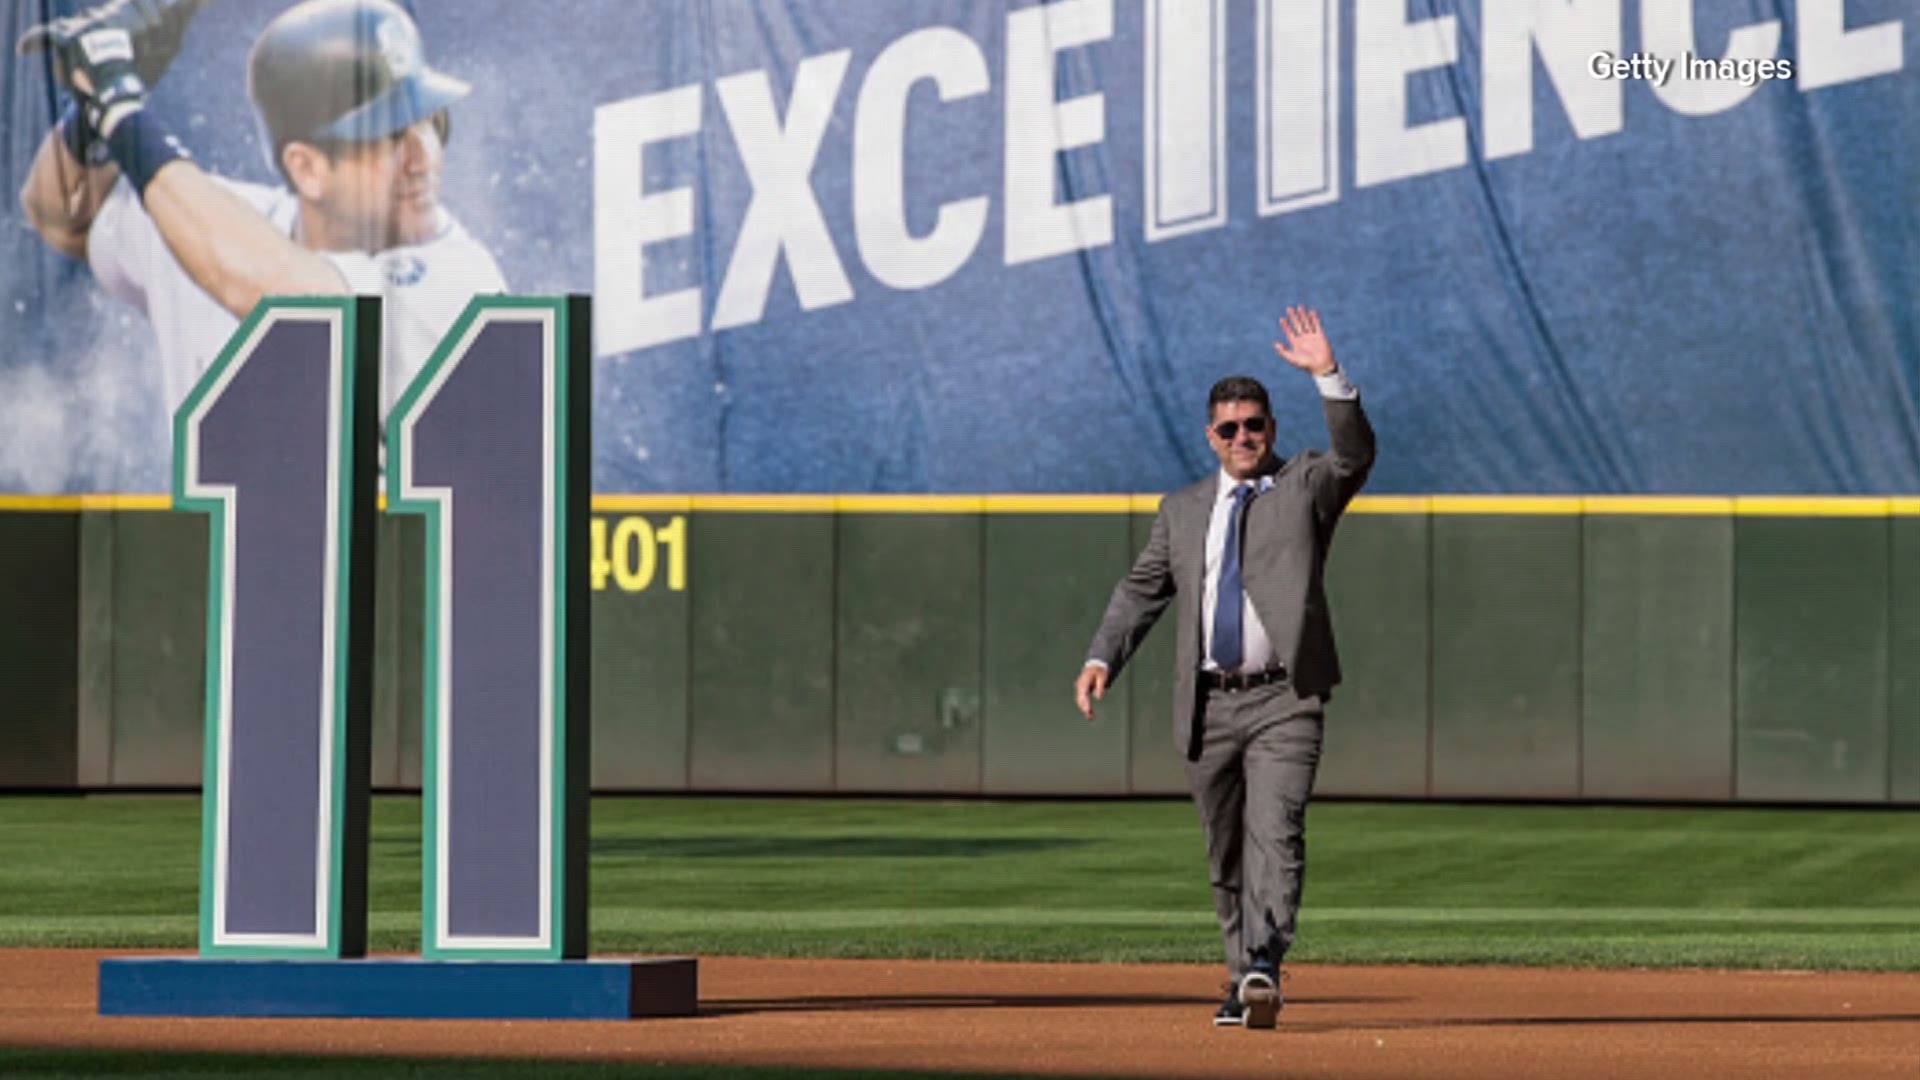 Seattle Mariners legend Edgar Martinez receives the call to the